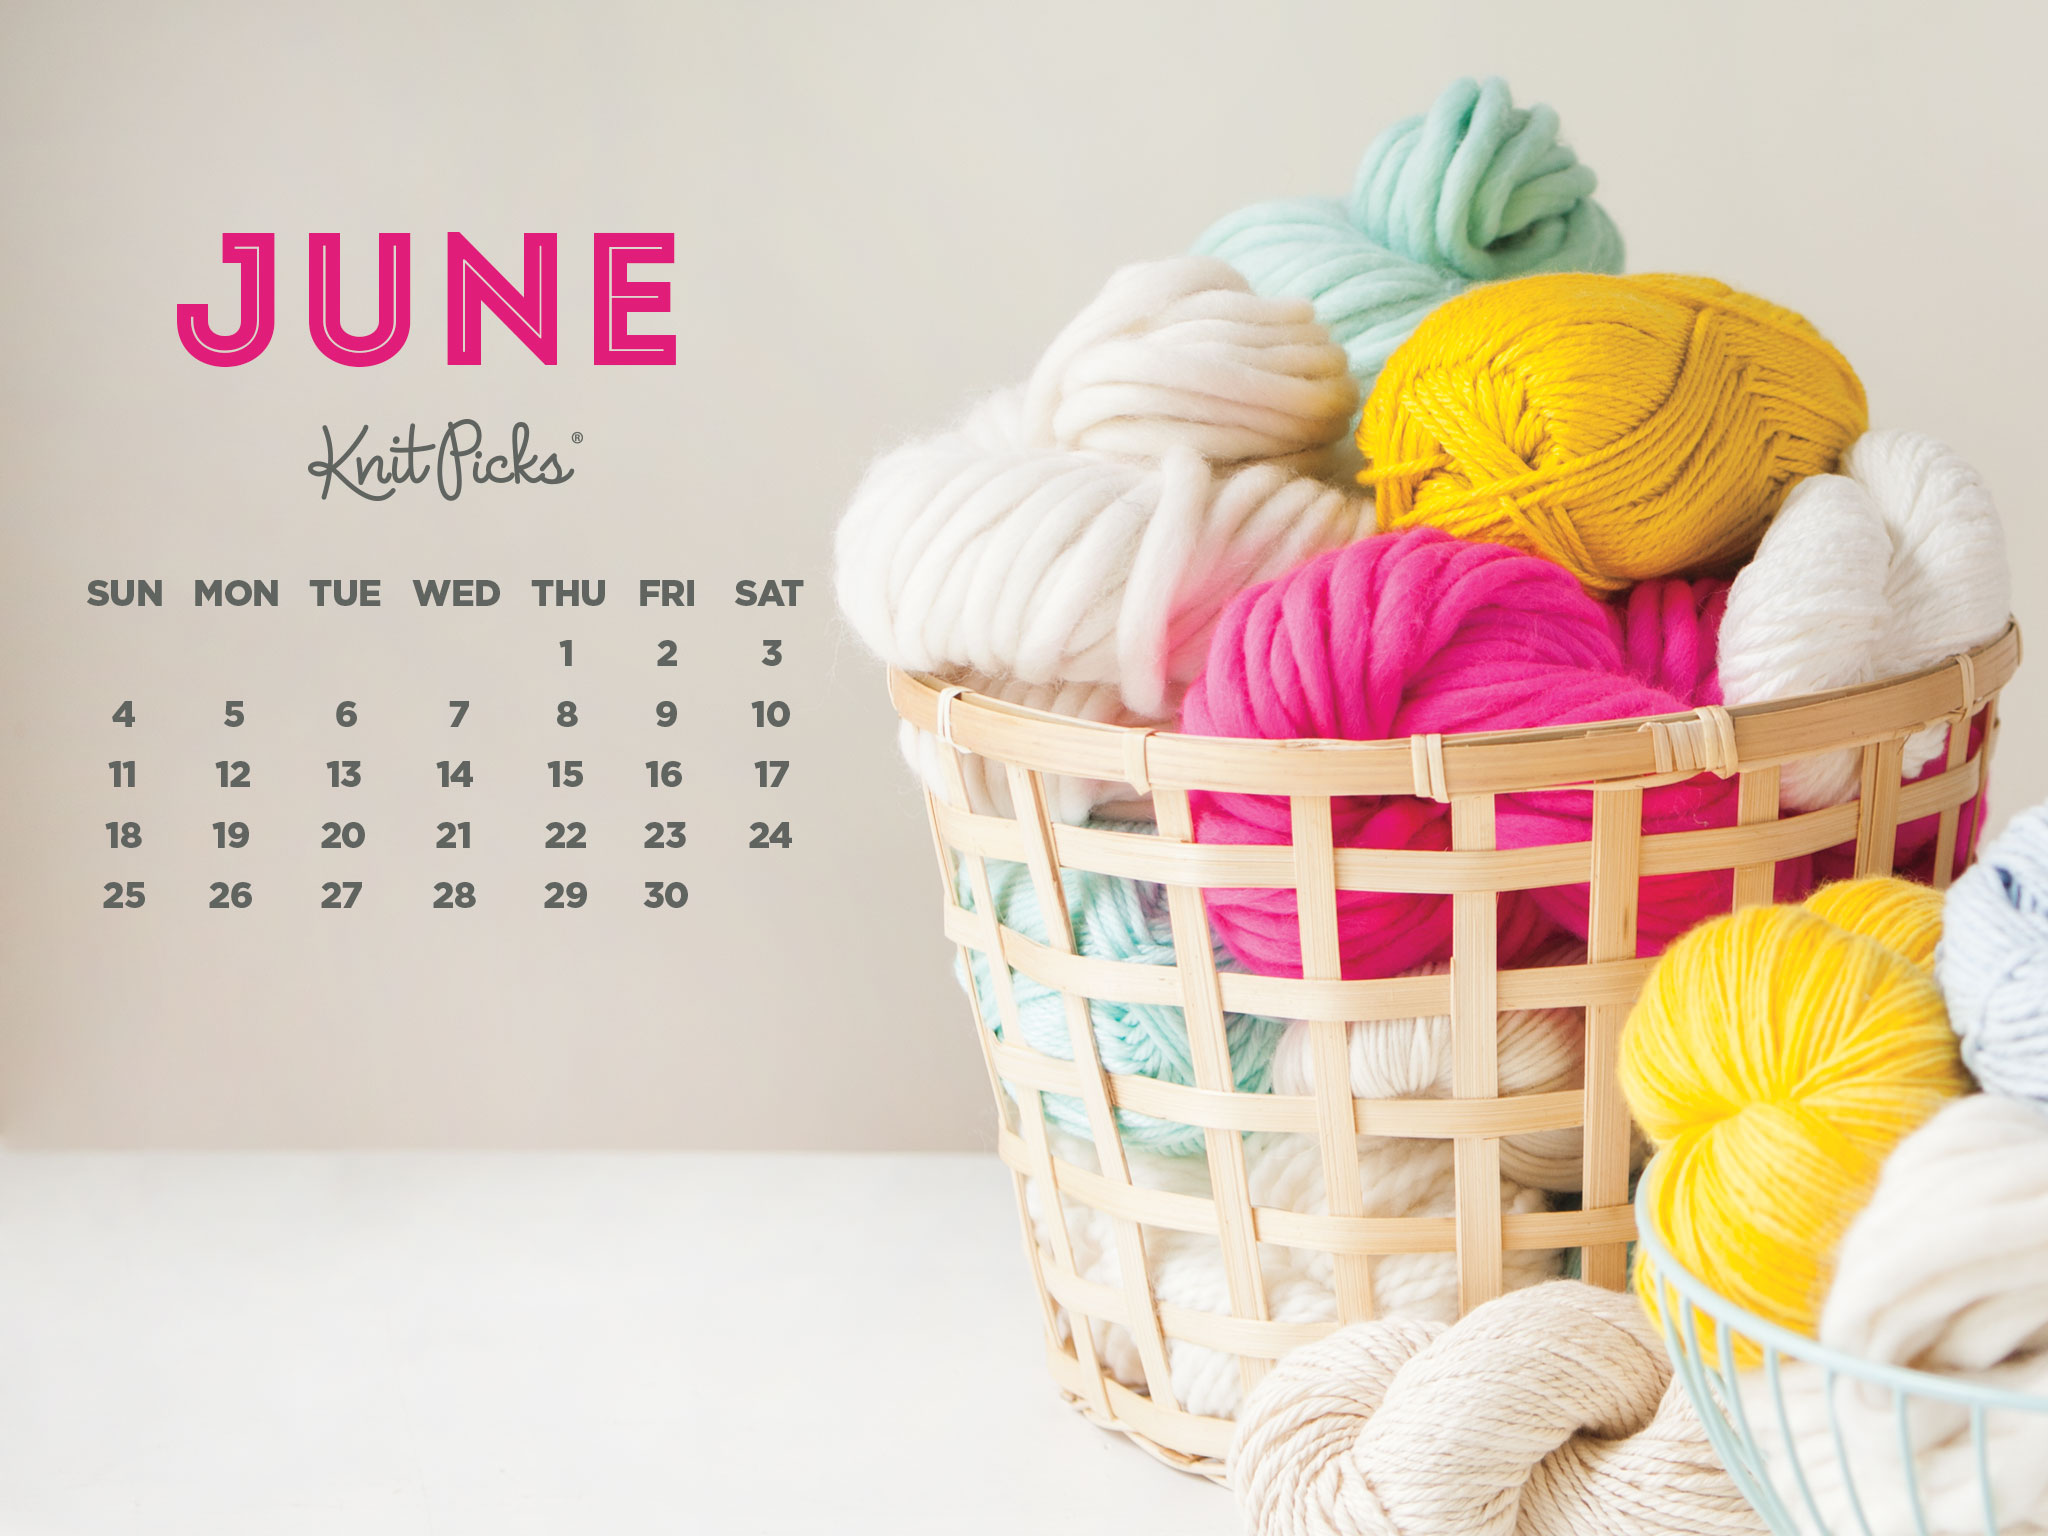 june-2017-calendar-templates-for-word-excel-and-pdf